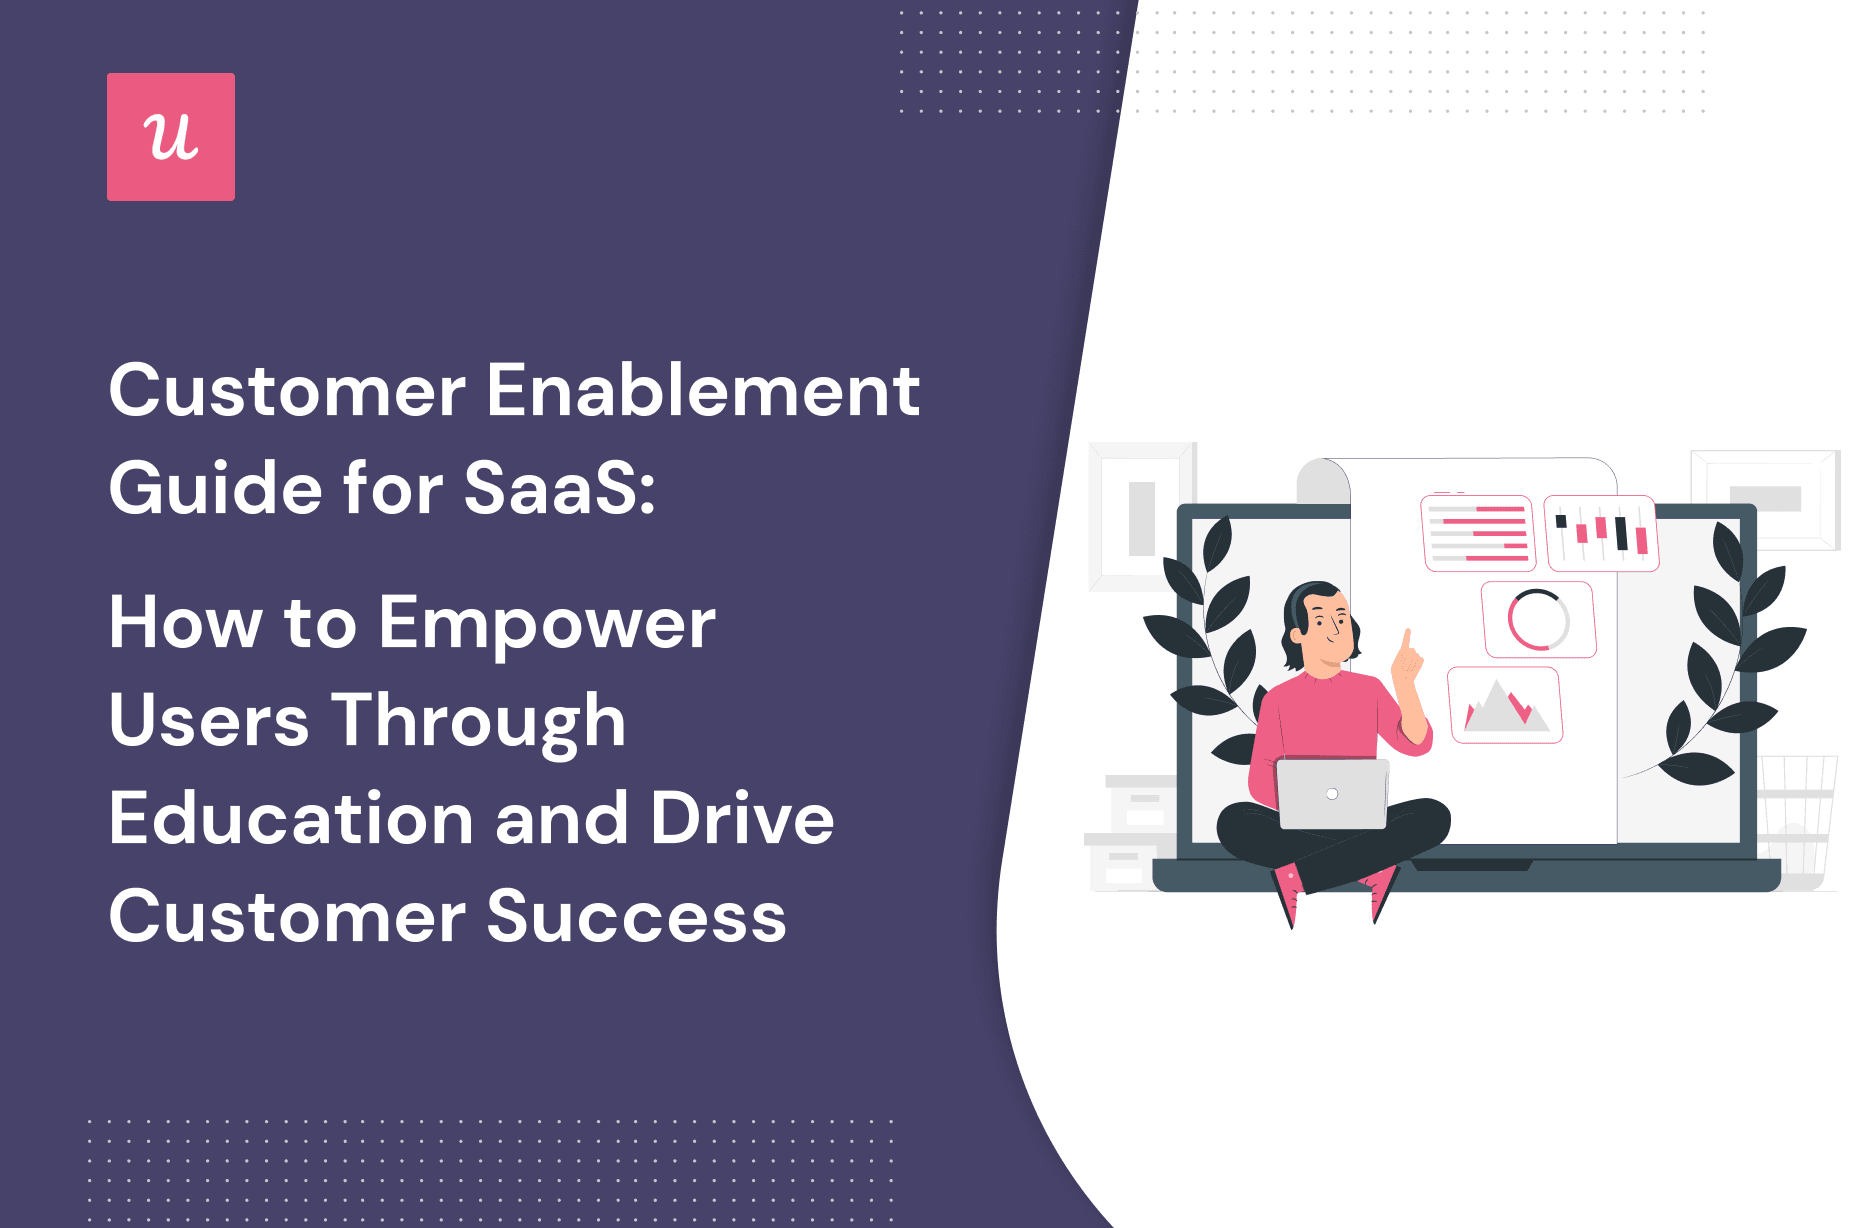 Customer Enablement Guide For SaaS: How to Empower Users Through Education and Drive Customer Success cover